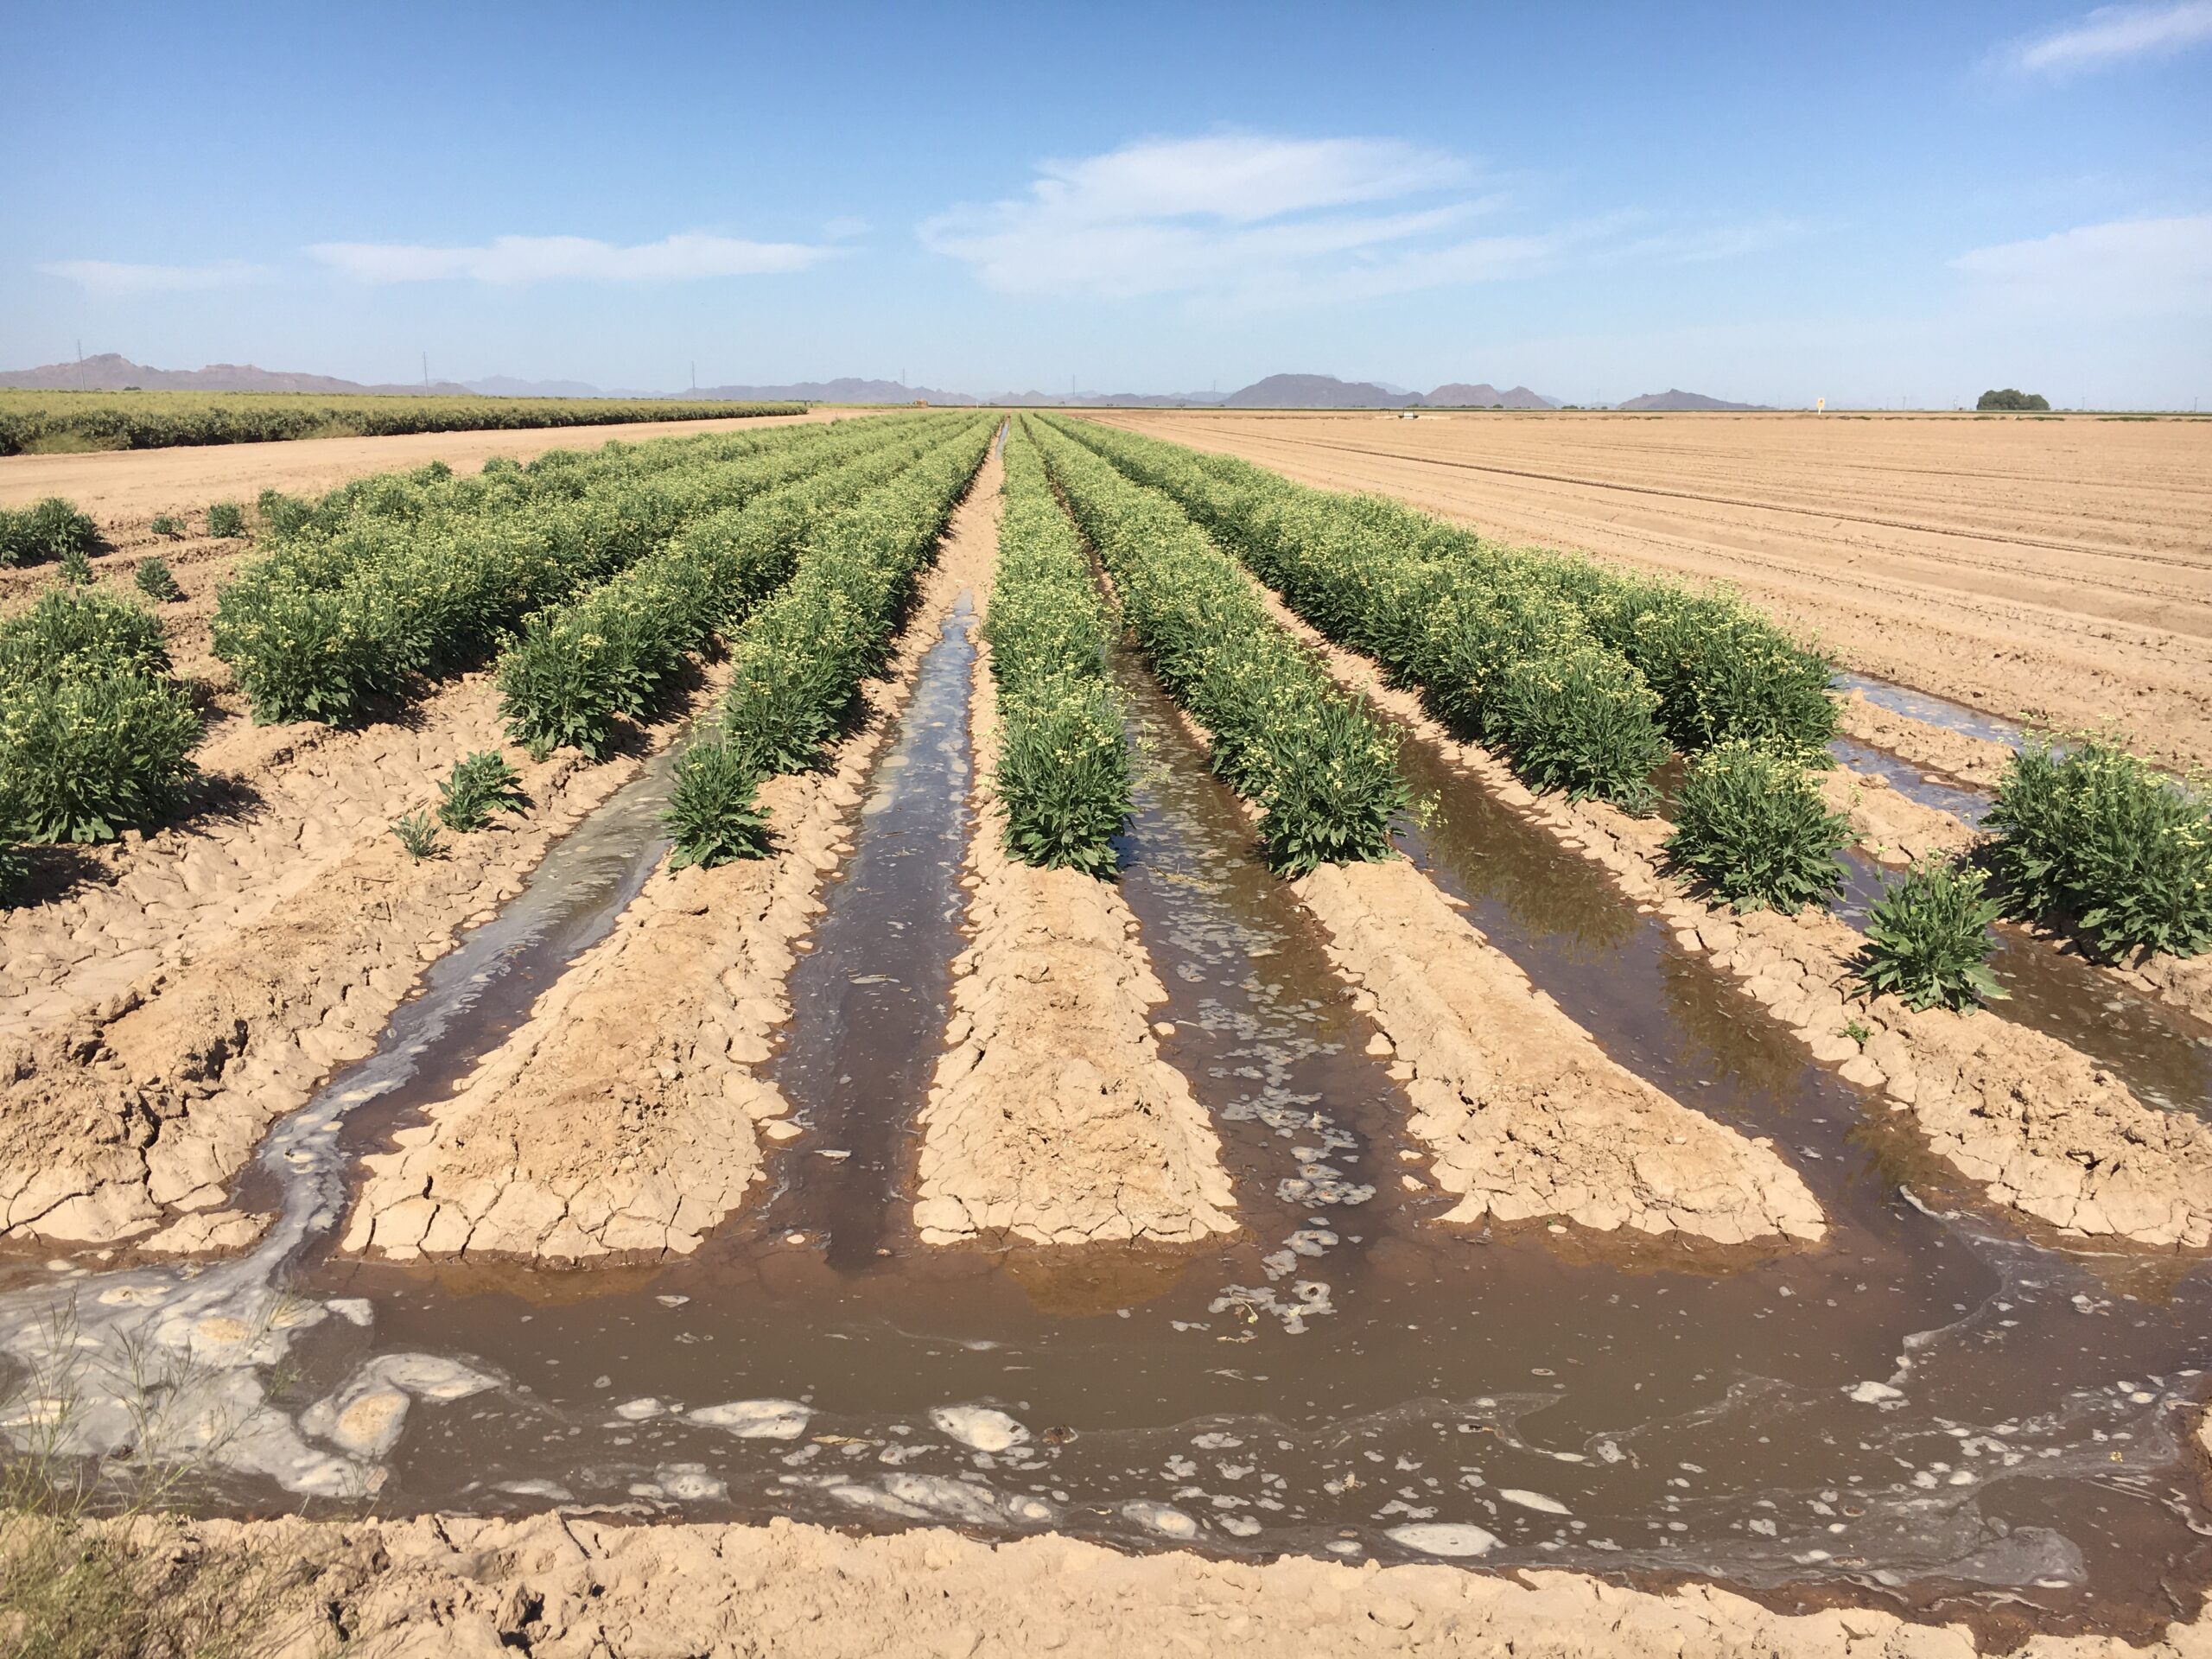 A partnership between Arizona farmer Will Thelander, Environmental Defense Fund, Bridgestone Americas, and the University of Arizona is testing <a style="color: #F2A41E;" href="https://blogs.edf.org/growingreturns/2022/03/21/crop-switching-megadrought-guayule-arizona-farmers-water/" target="_blank"> crop switching on Thelander’s Pinal County farm from water-intensive alfalfa to guayule</a>, which can be used to make natural rubber products like gloves and medical devices. Now that Pinal County agricultural producers have lost their access to Colorado River water, the six-year pilot project is testing a promising option for growers to adapt to reduced water deliveries while finding new market opportunities.